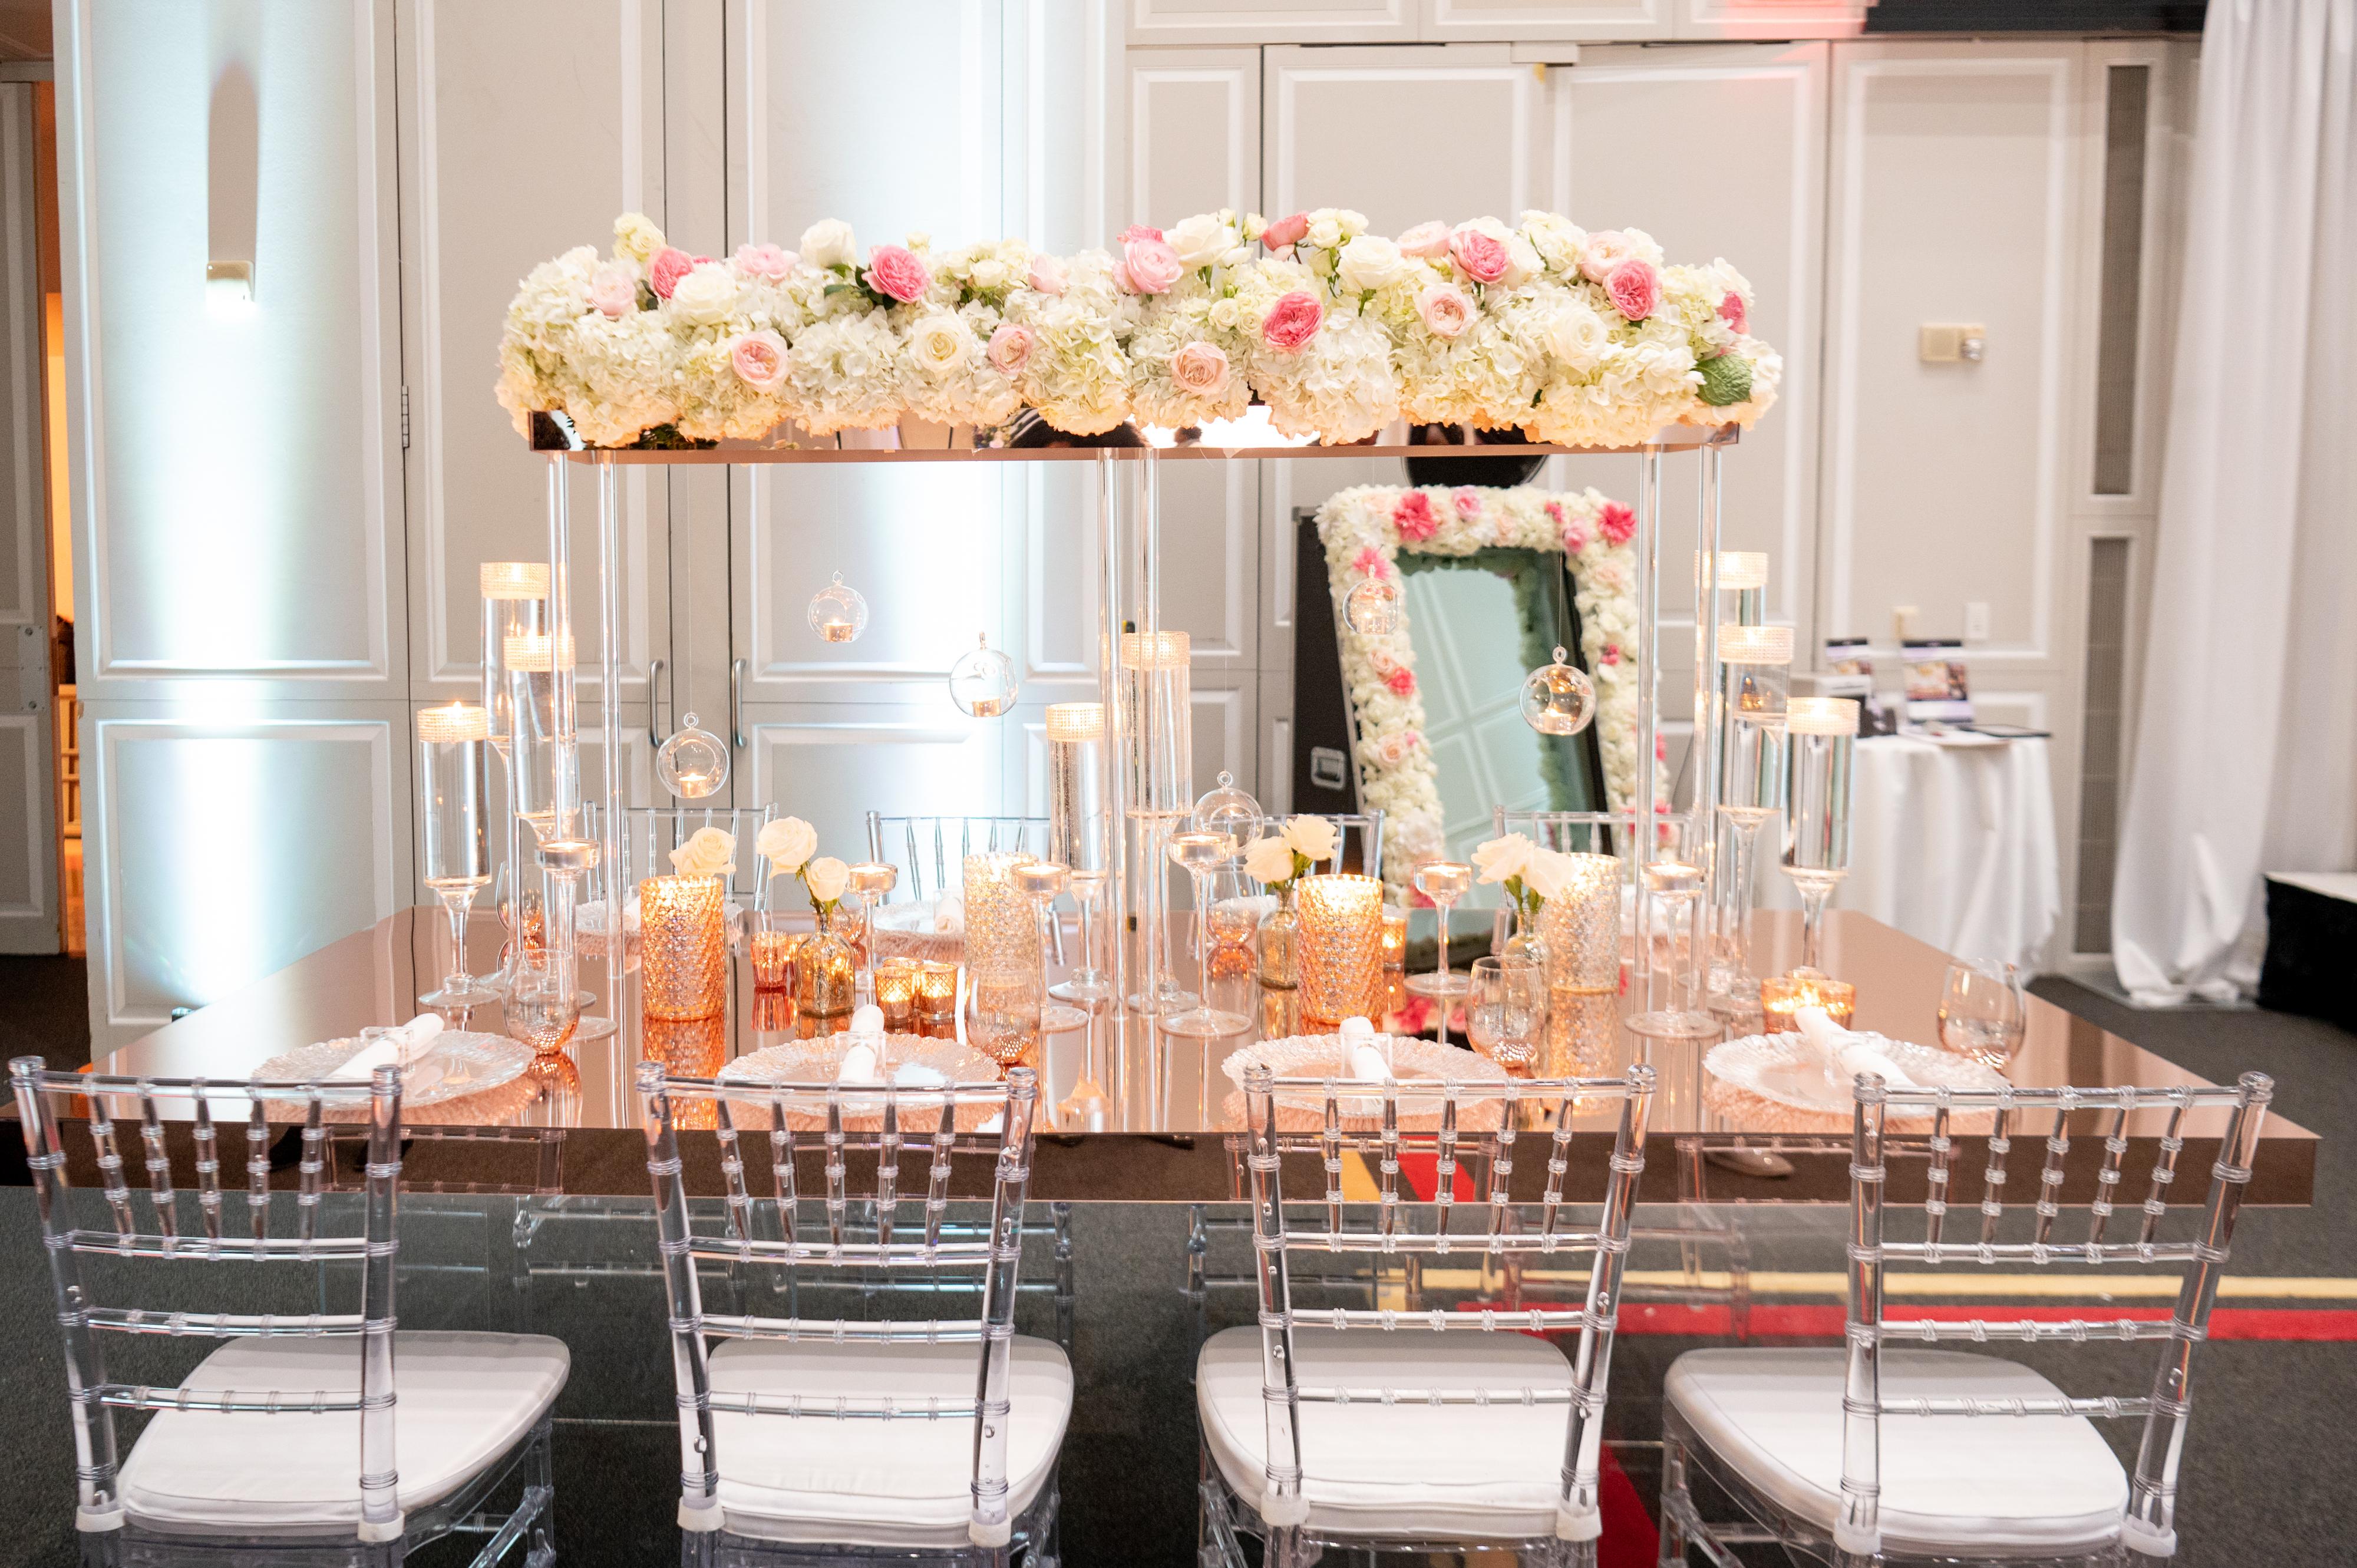 Long table set with tiers of white and pink flowers